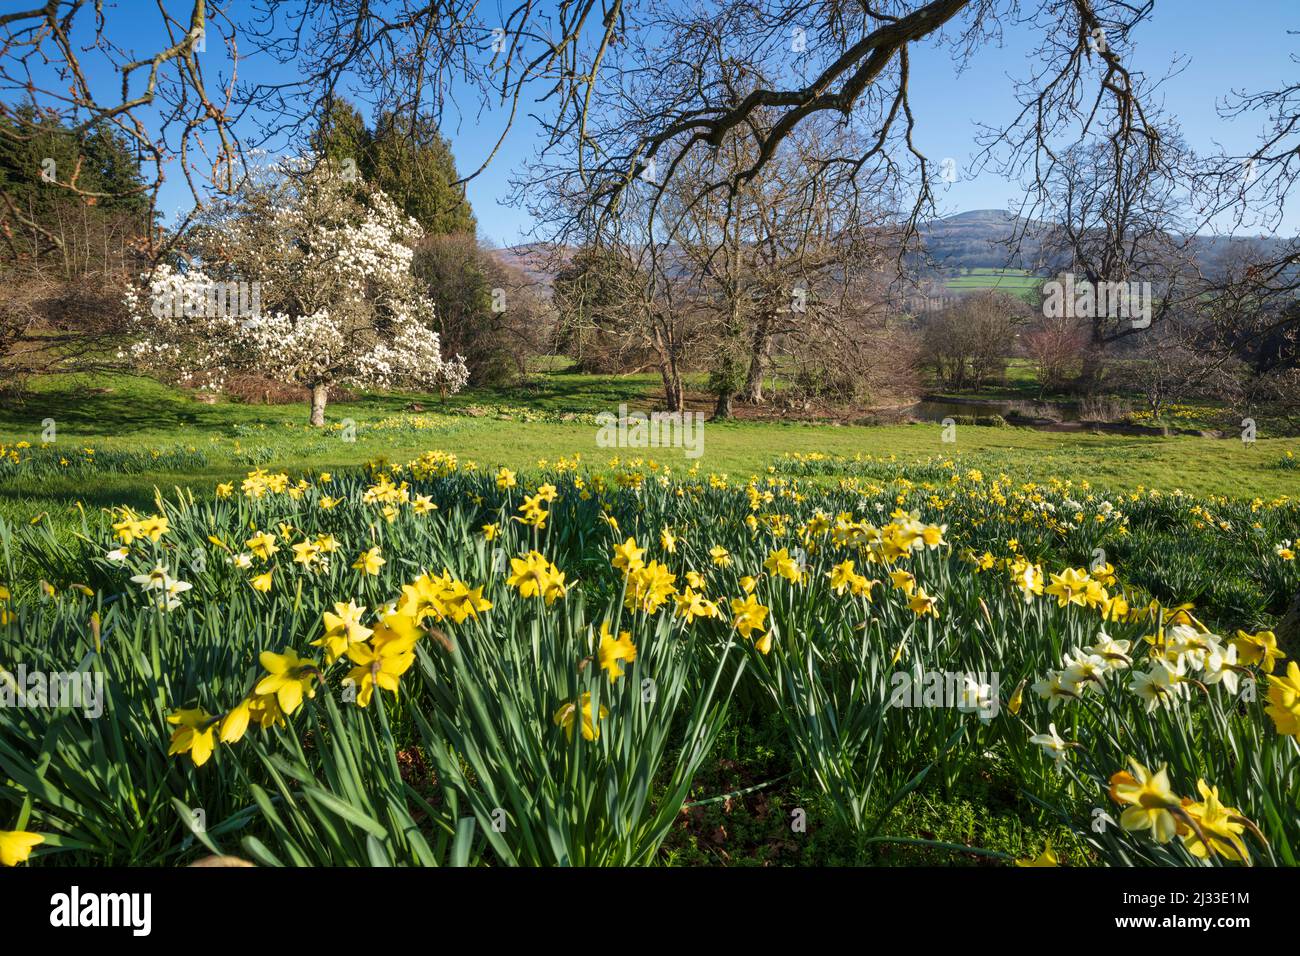 Spring Daffodils along the Usk Valley with Pen Cerrig-calch mountain behind, Crickhowell, Brecon Beacons NP, Powys, Wales, United Kingdom, Europe Stock Photo